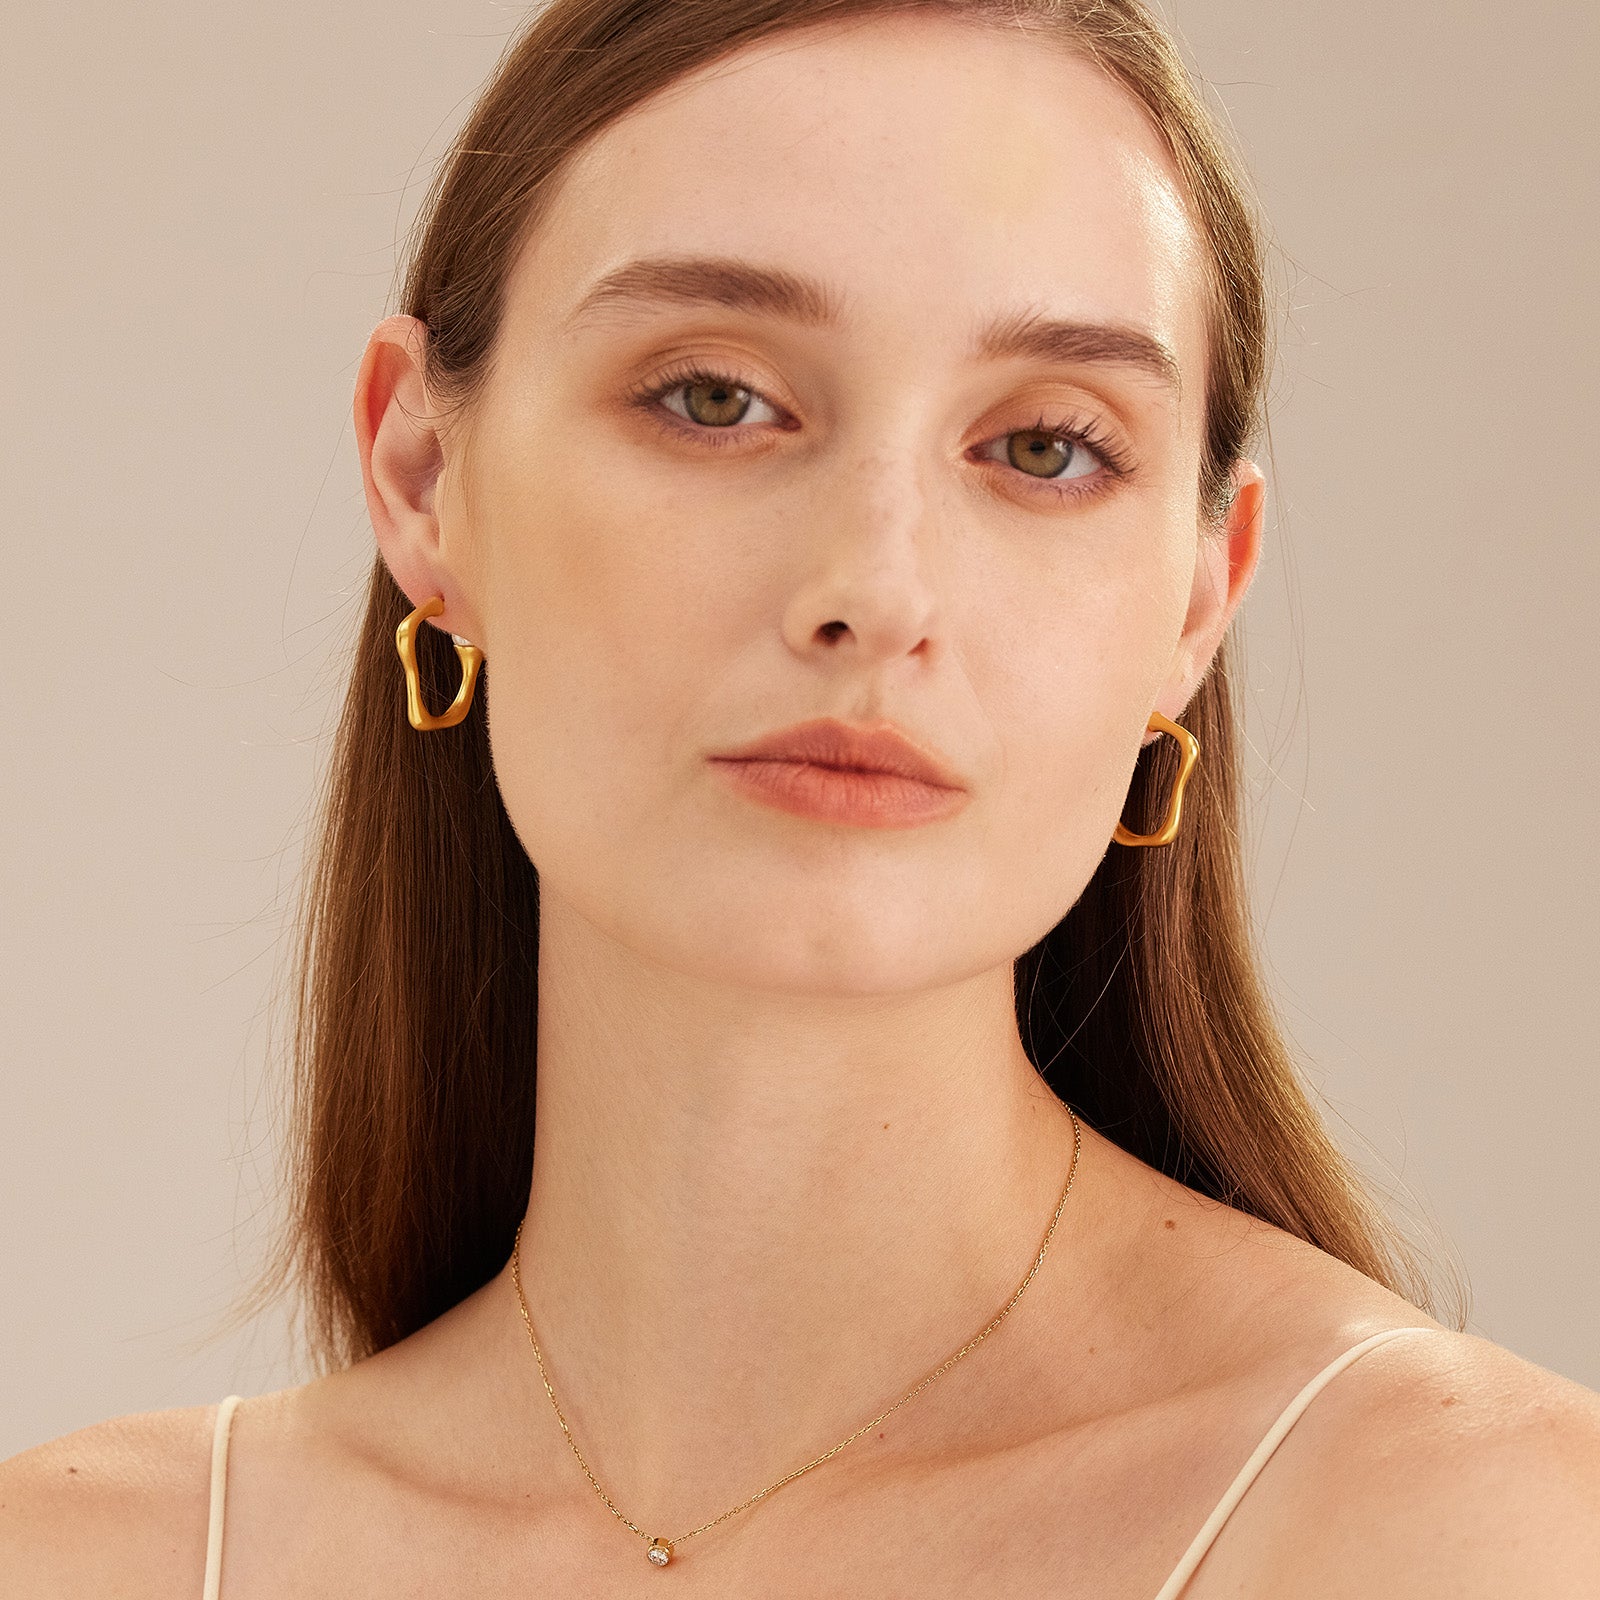 Squiggle Wavy Large Hoop Earrings, a glamorous and stylish accessory that adds a playful twist to the classic hoop design.